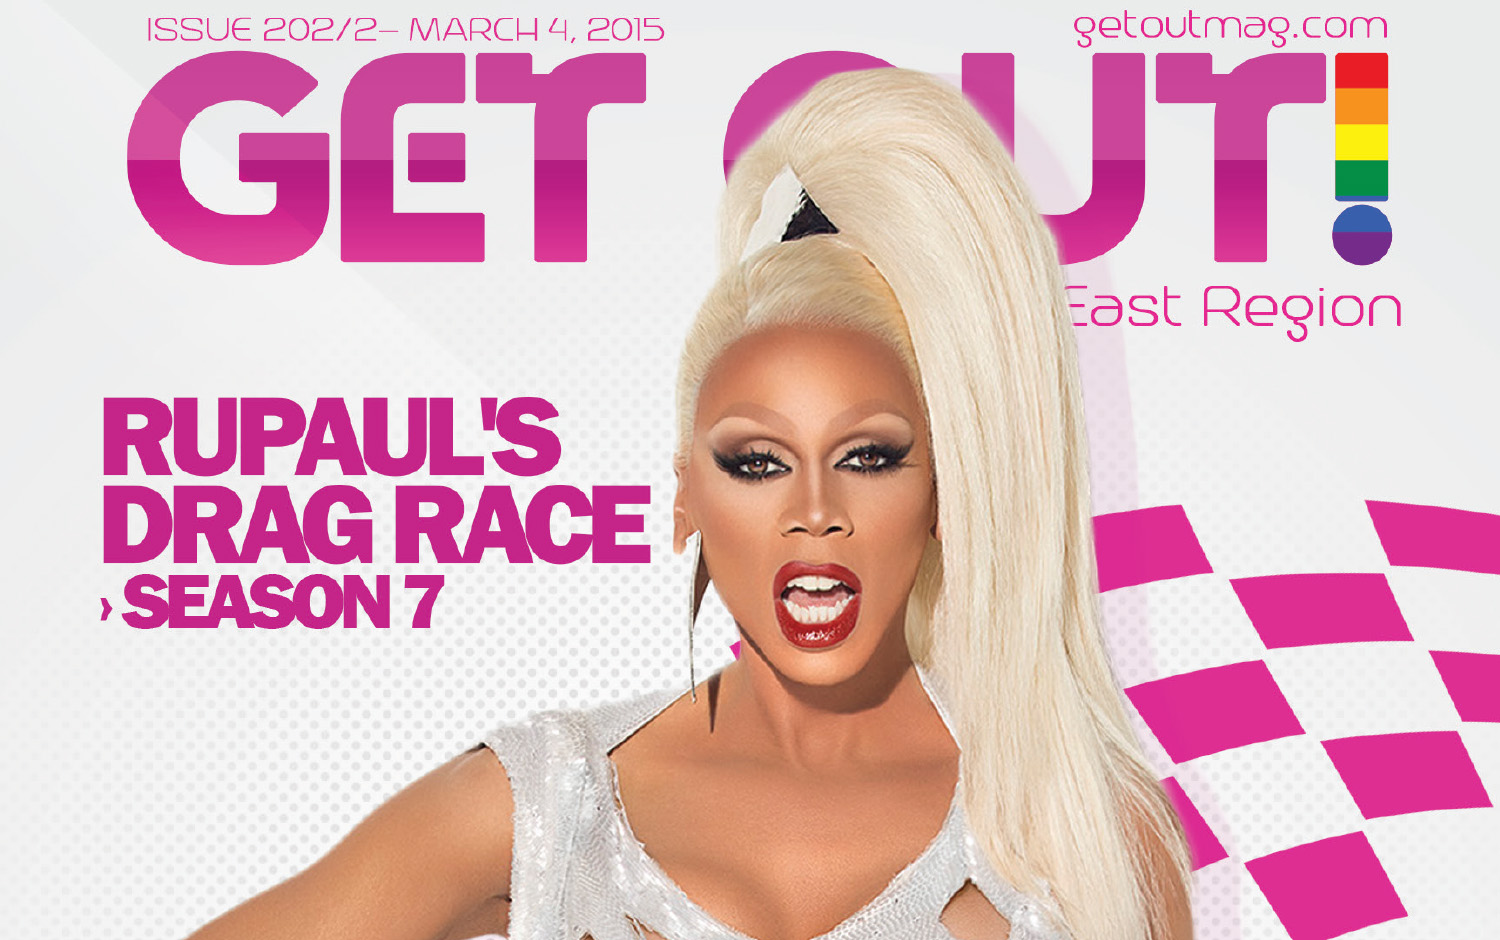  Get Out! GAY Magazine – Issue 202/2 –March 4 | RUPAUL’S DRAG RACE SEASON 7